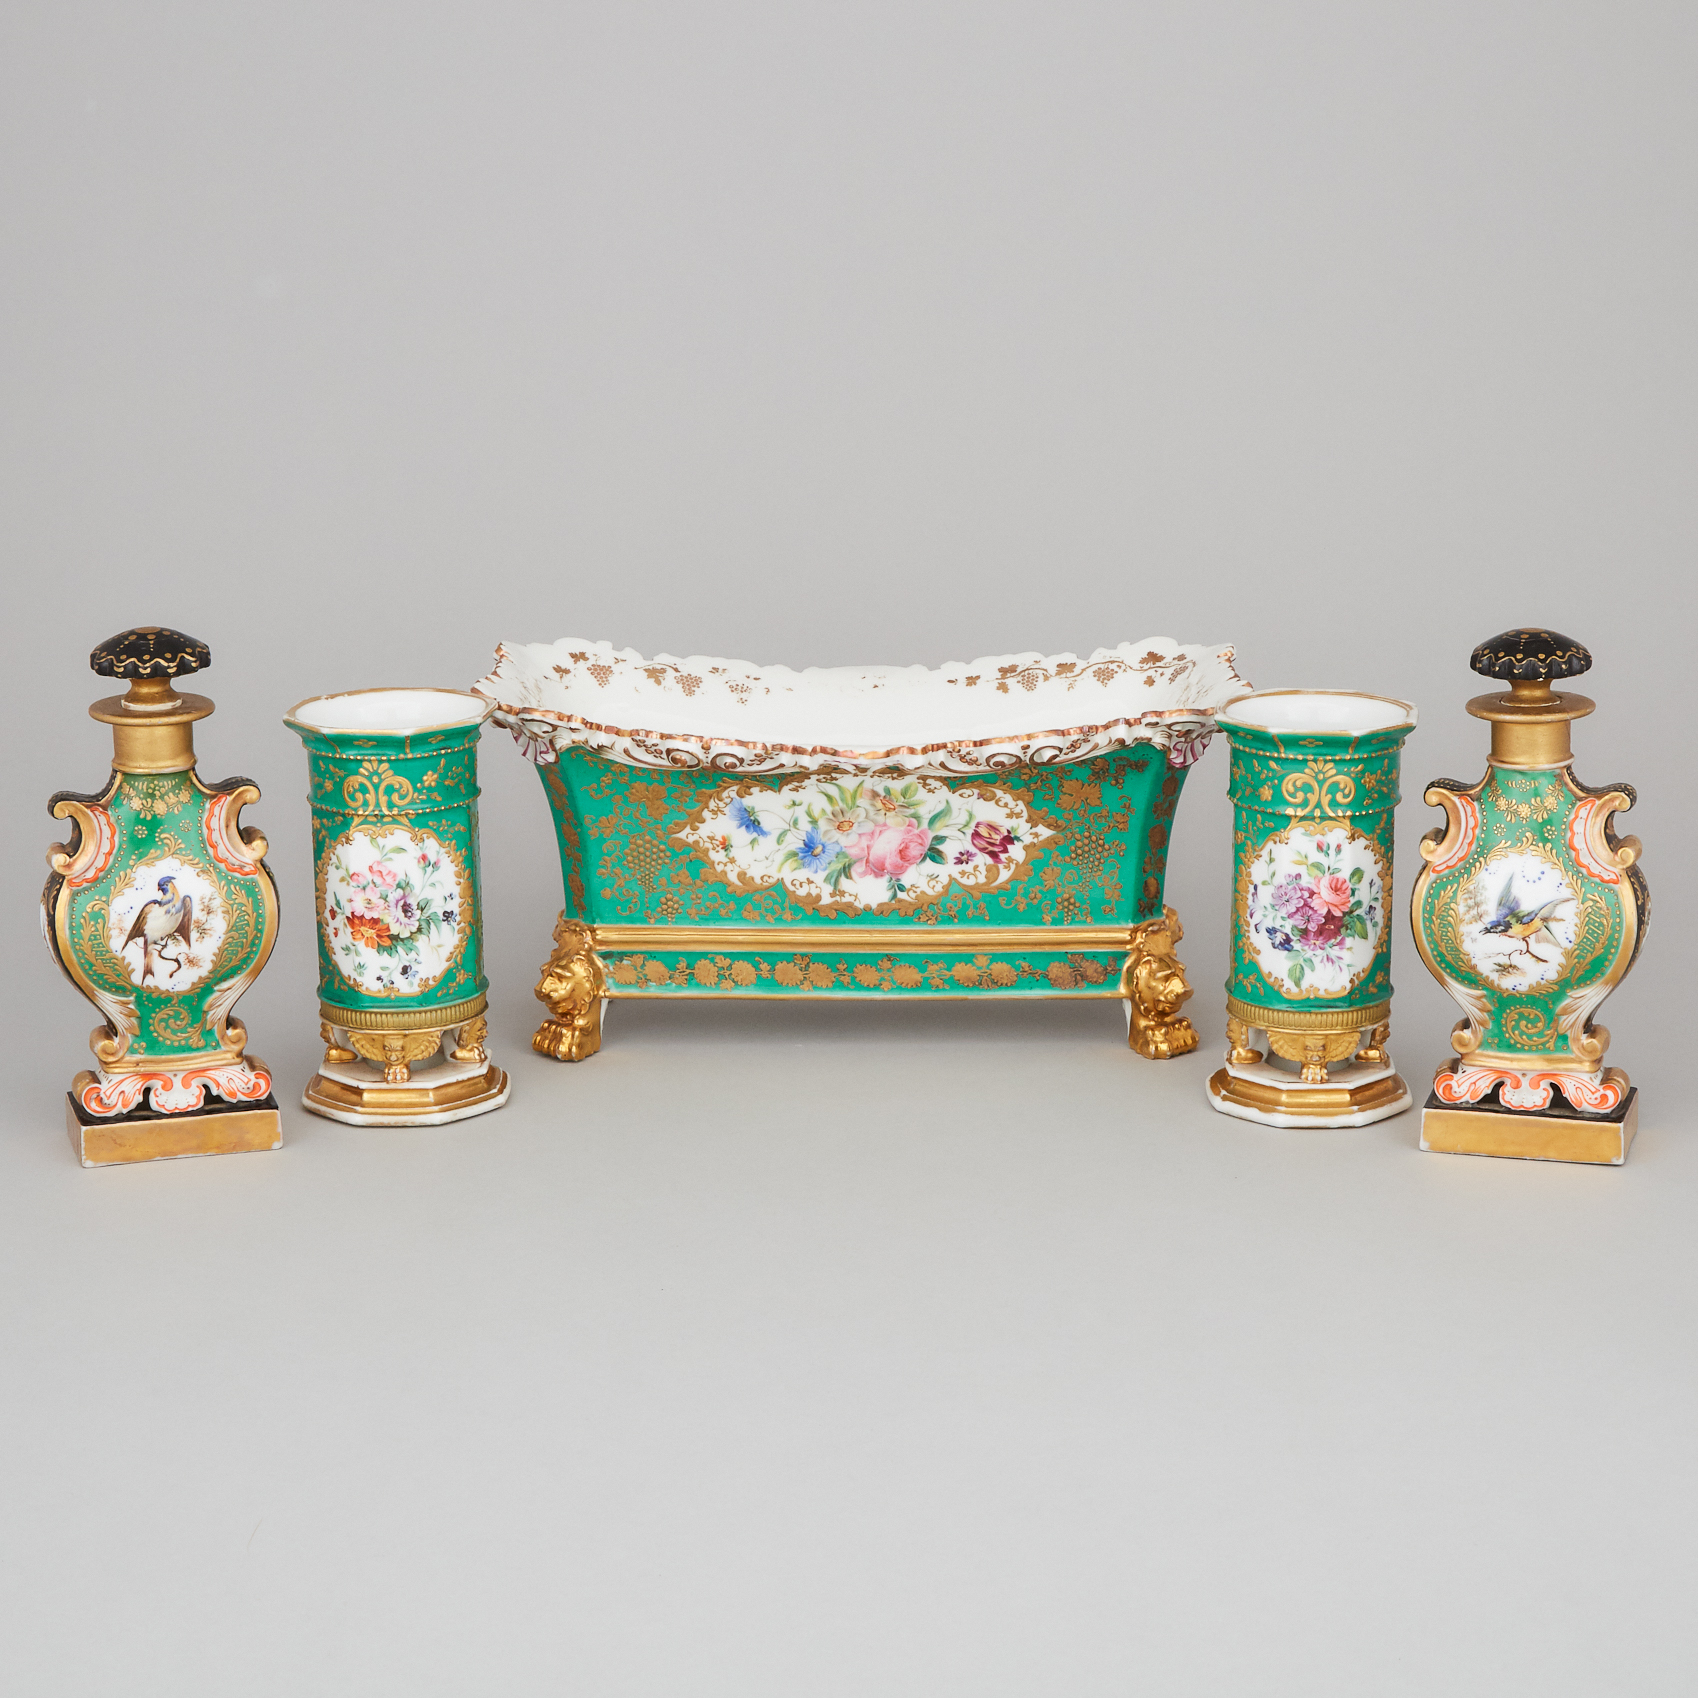 Pair of Paris Green Ground and Gilt Vases, Pair of Toilet Water Bottles, and a Jacob Petit Jardinière, 19th century